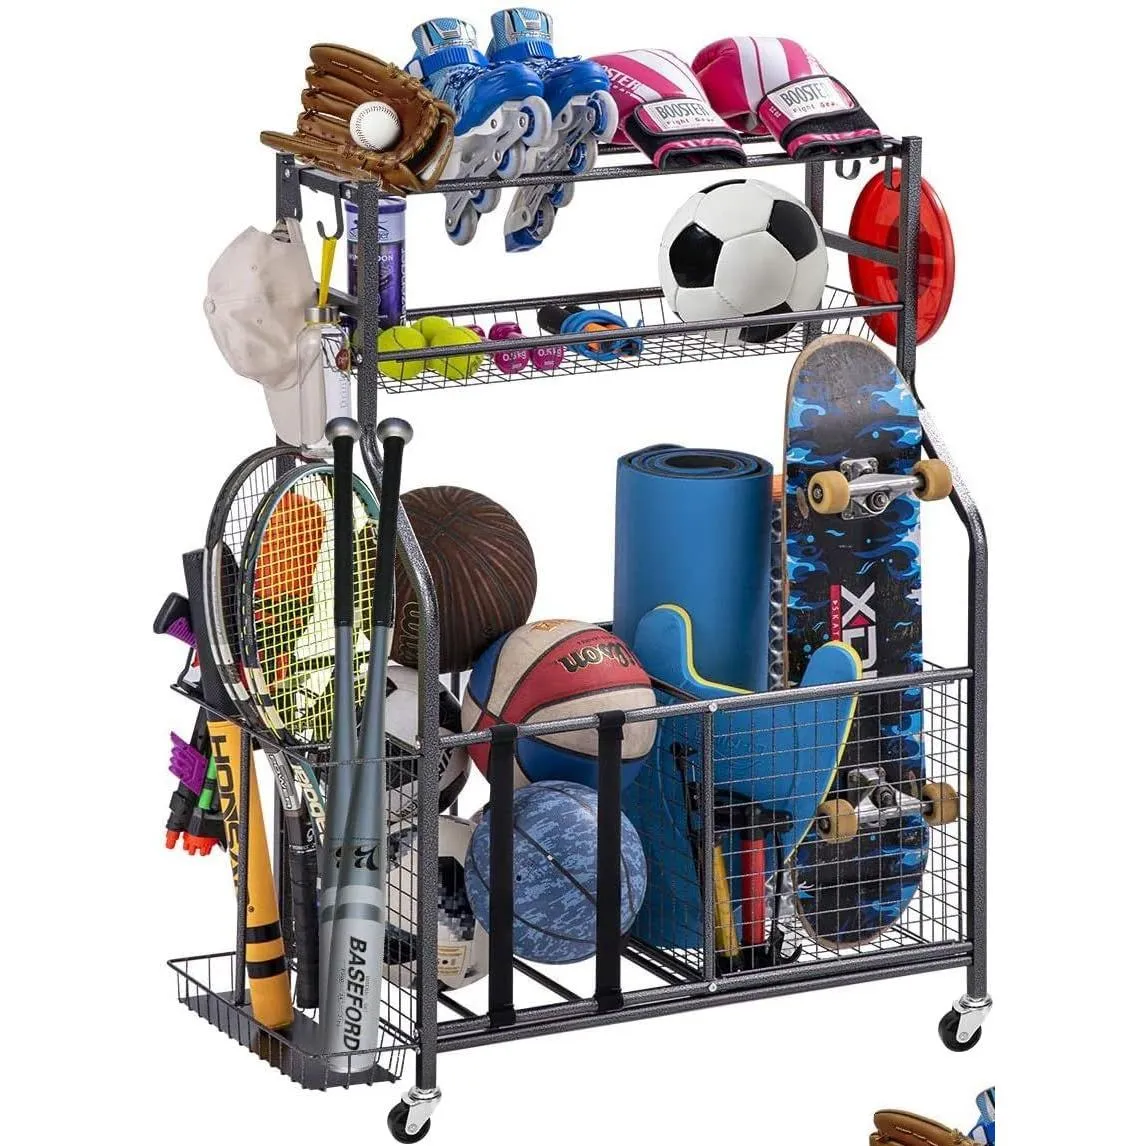 Other Sporting Goods Garage Sports Equipment Storage Organizer With Baskets And Hooks - Easy To Assemble Ball Gear Rack Holds Basket Dhjn0